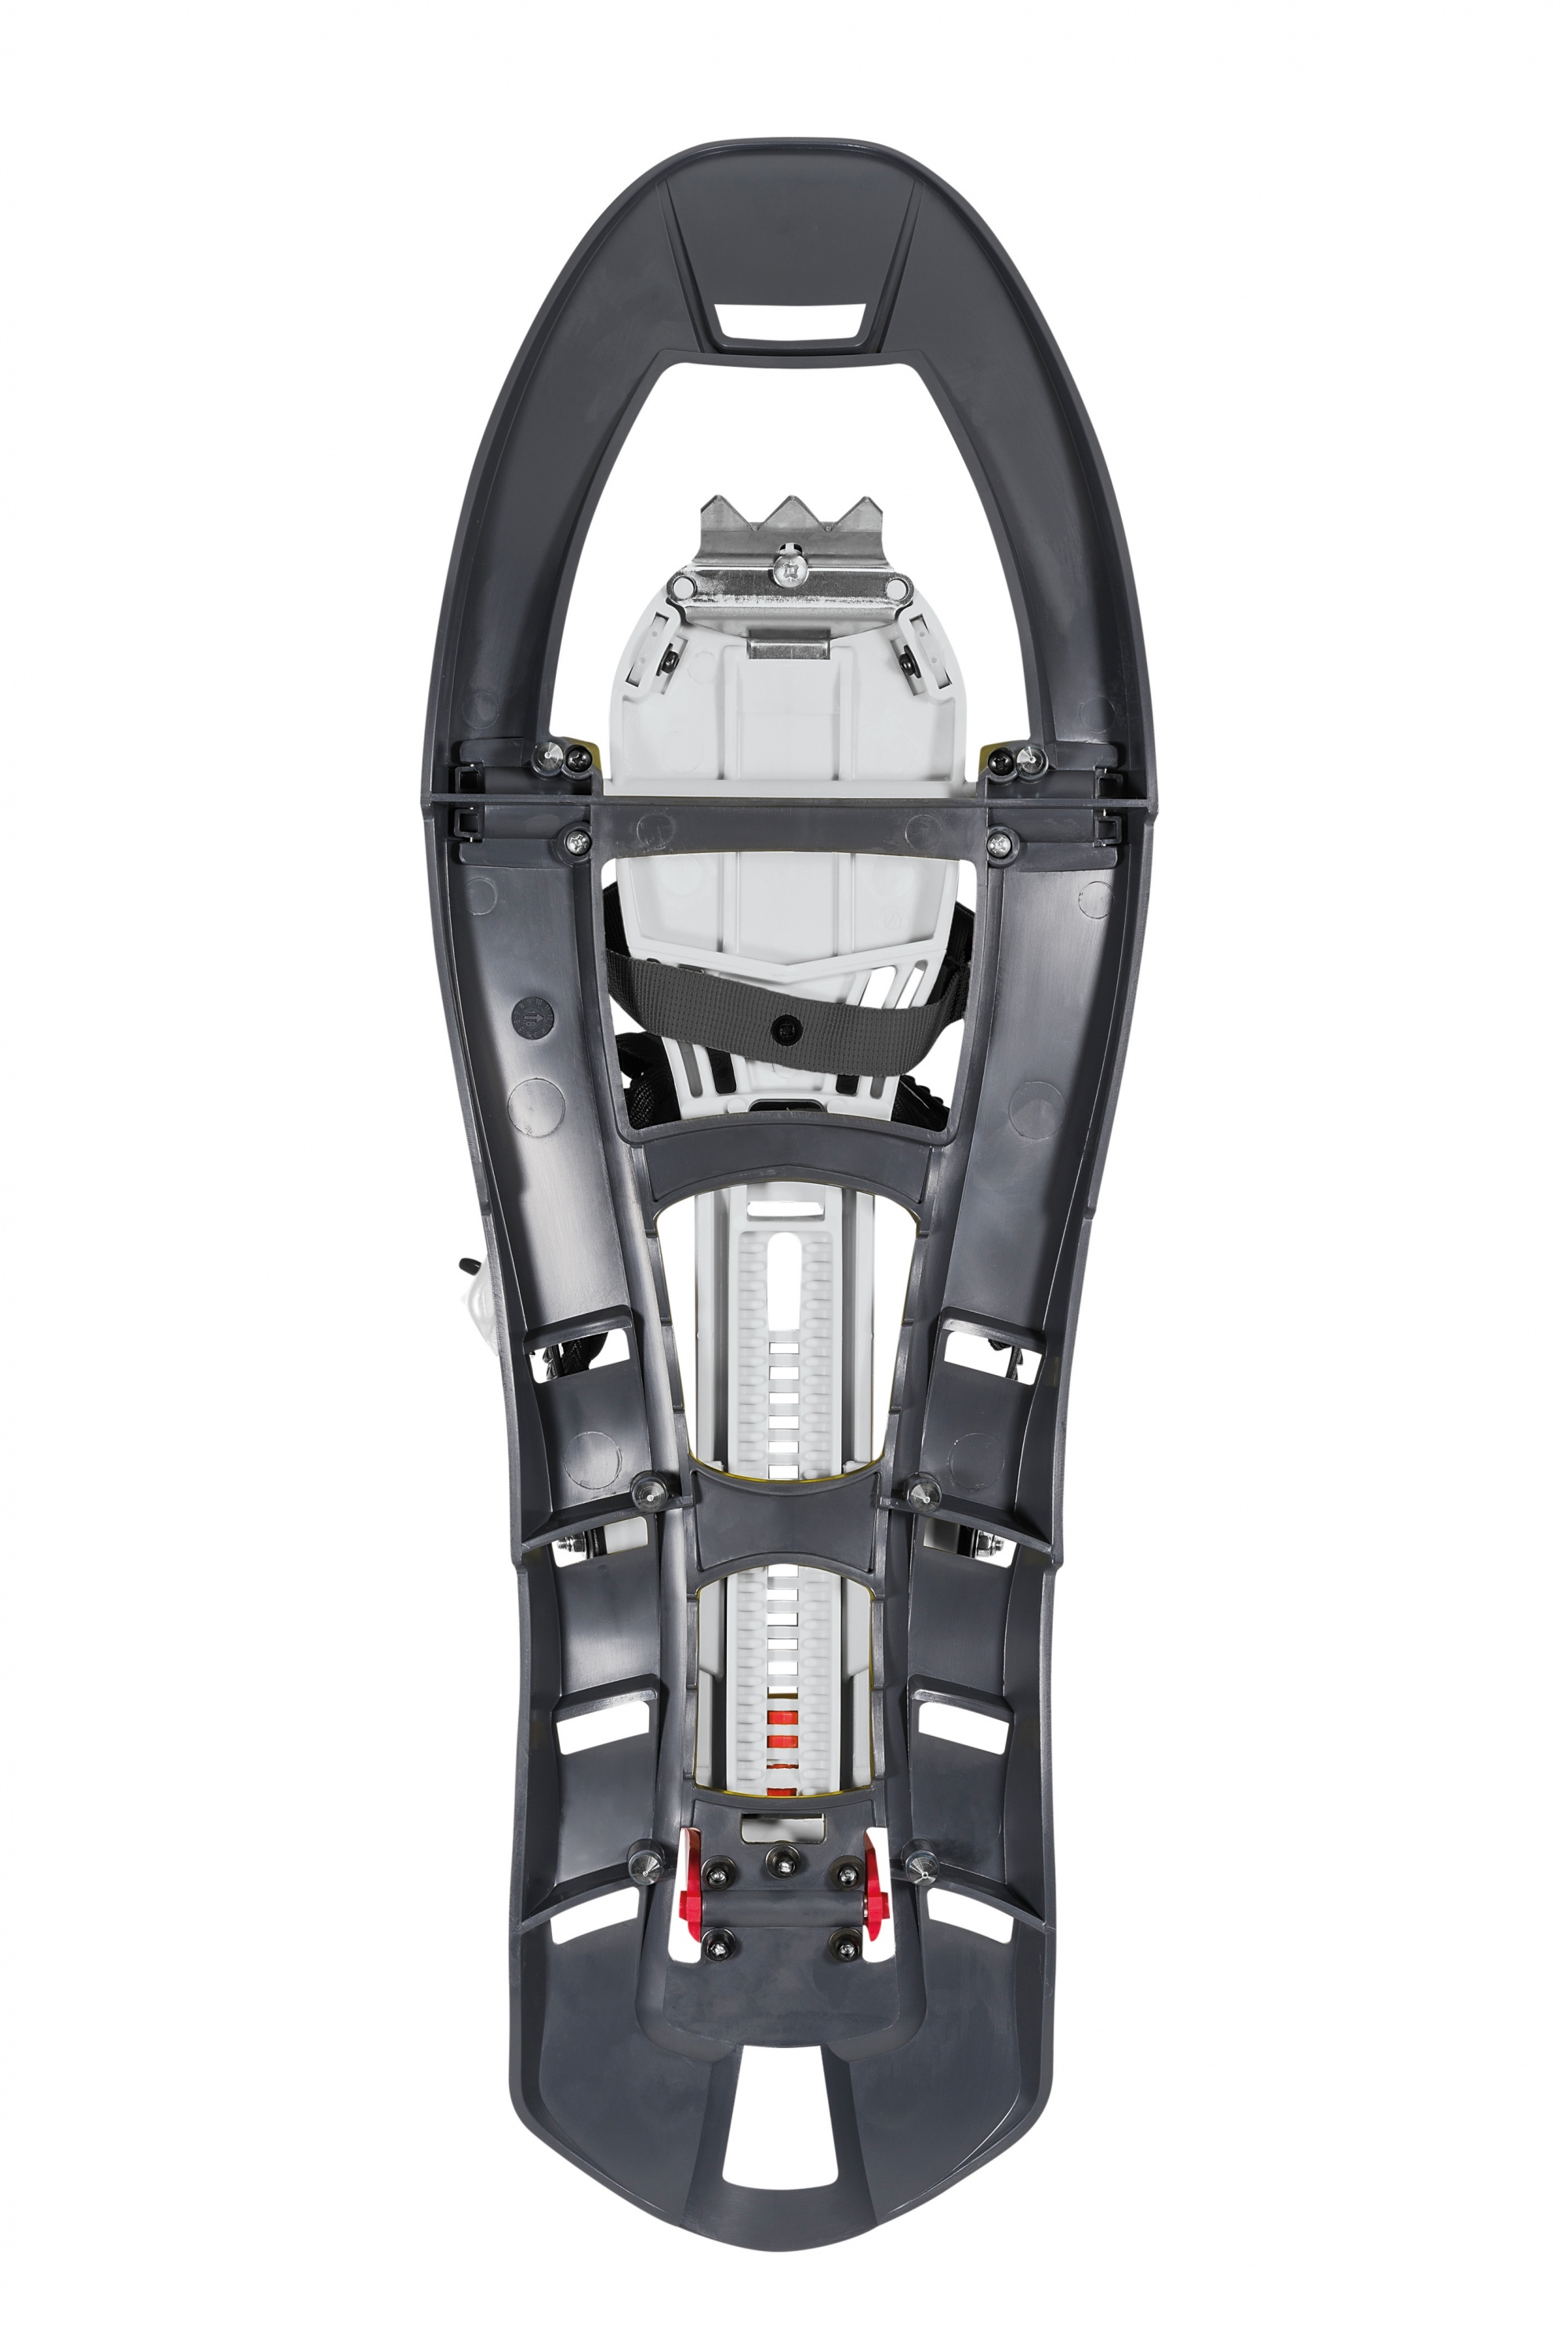 PINTER SPECIAL SNOWSHOES. The compact snowshoe for the comfy